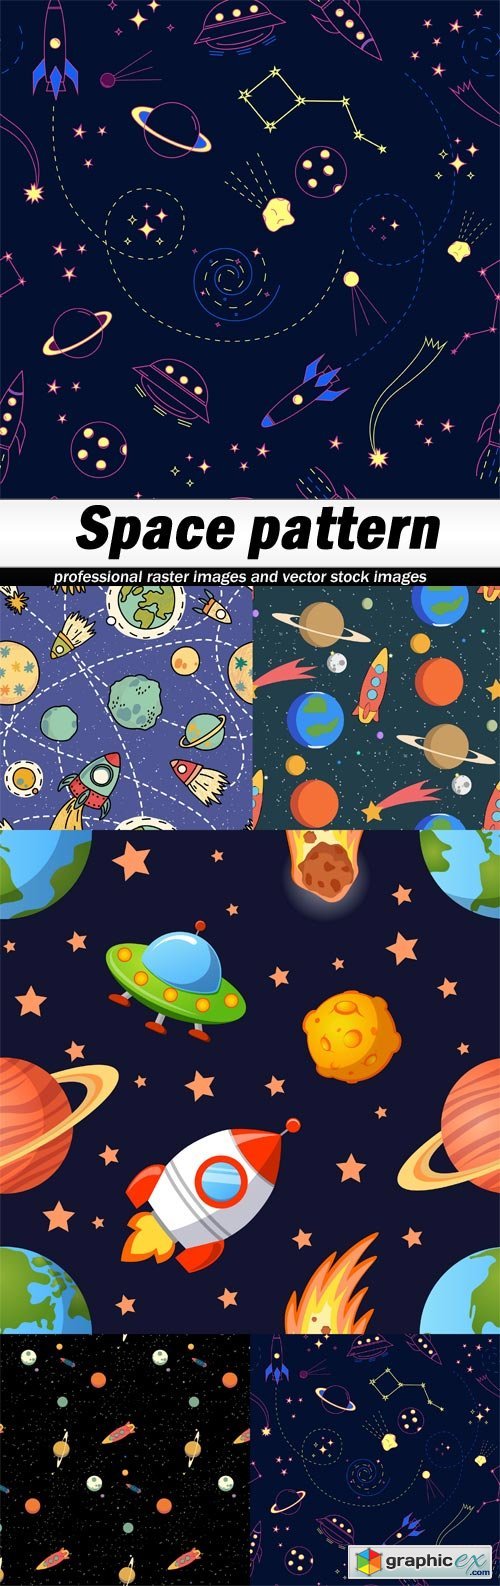 Space pattern - 5 EPS